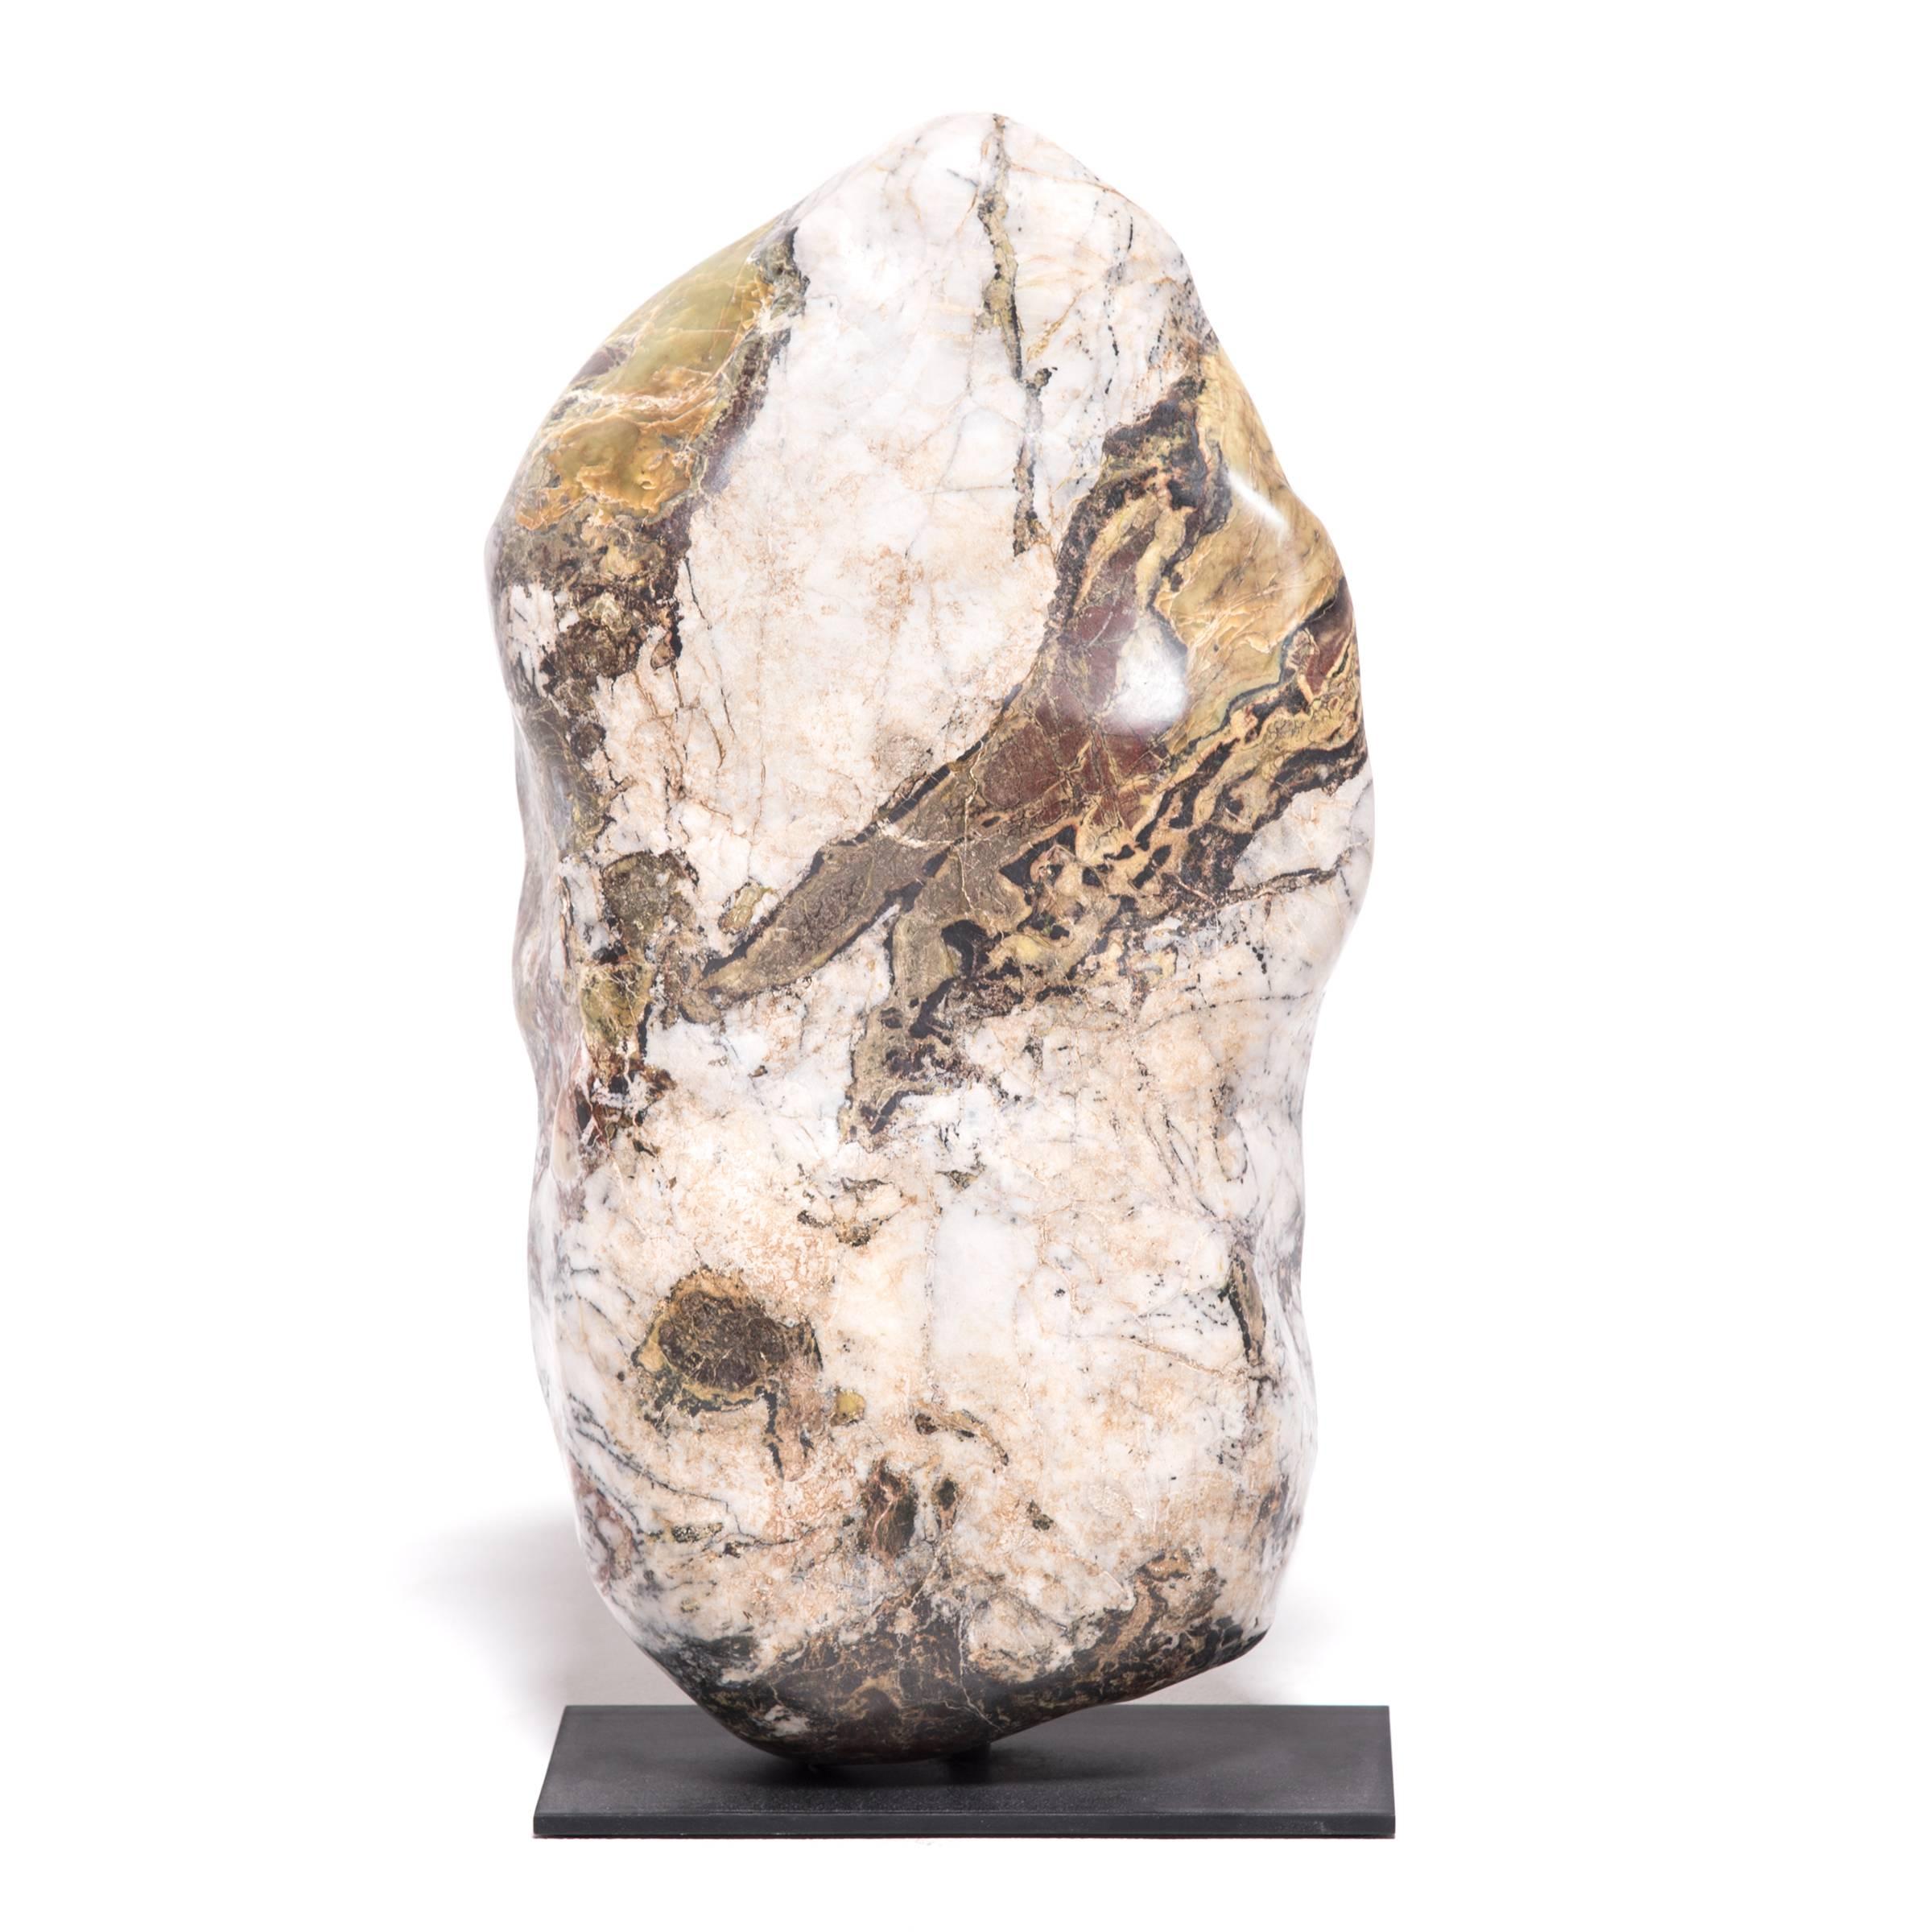 Brimming with gestural swaths of jade and intricate veining, this gorgeous meditation stone, known as Chinese colorful stone, invites contemplation of nature’s infinite creativity. Imaginative landscapes, figures and otherworldly apparitions come